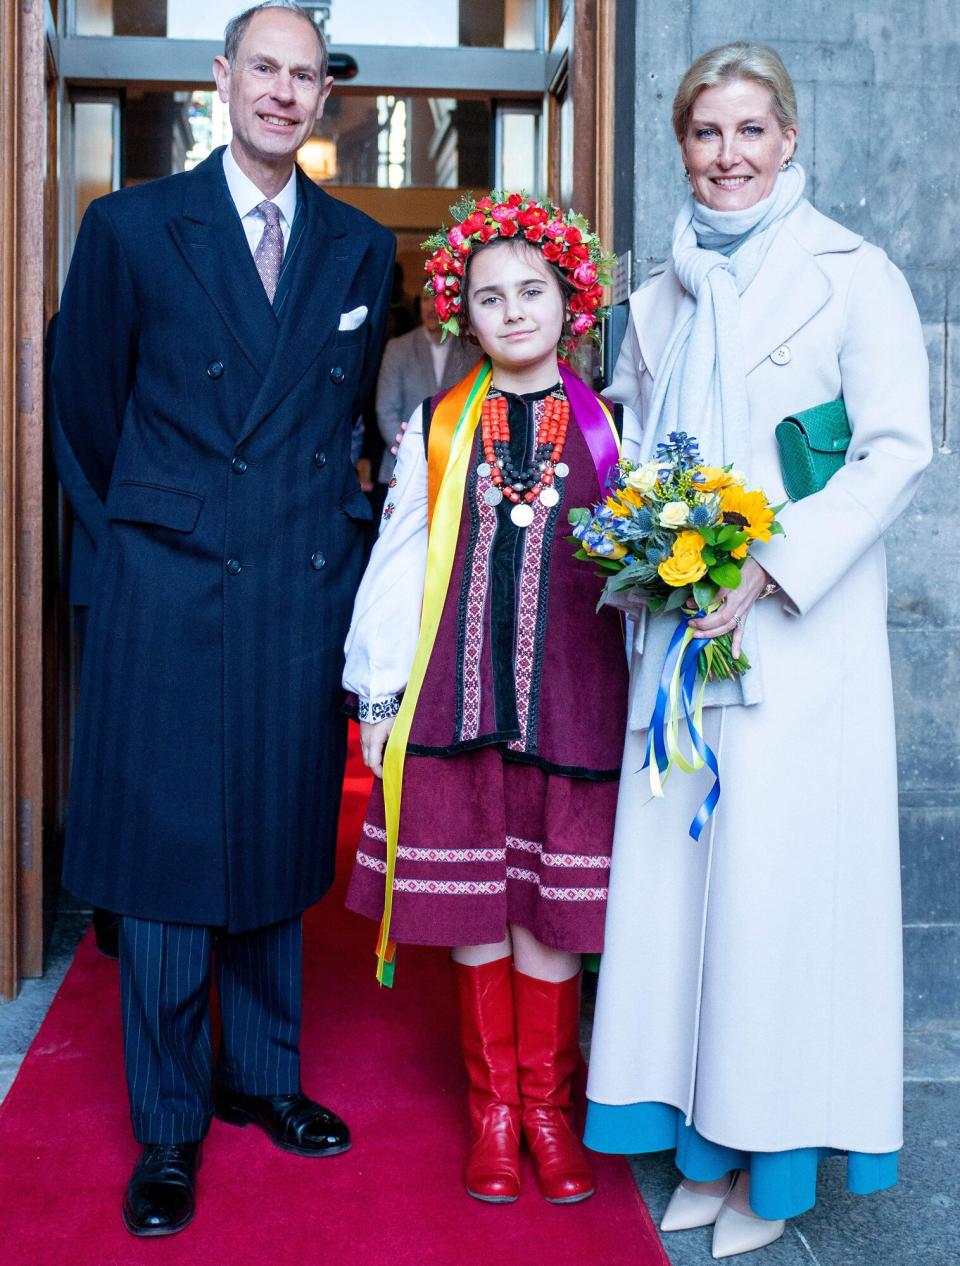 The new Duke and Duchess of Edinburgh, Britain's Prince Edward, Duke of Edinburgh (L) and Britain's Sophie, Duchess of Edinburgh (R) pose for a photograph with Marianna Melnyk, aged 10, from the Ukrainian community at the City Chambers in Edinburgh to mark one year since the city's formal response to the invasion of Ukraine on March 10, 2023. - Britain's King Charles III on Friday awarded his younger brother Edward the title Duke of Edinburgh, in line with the wishes of the late Queen Elizabeth II and her husband Prince Philip.